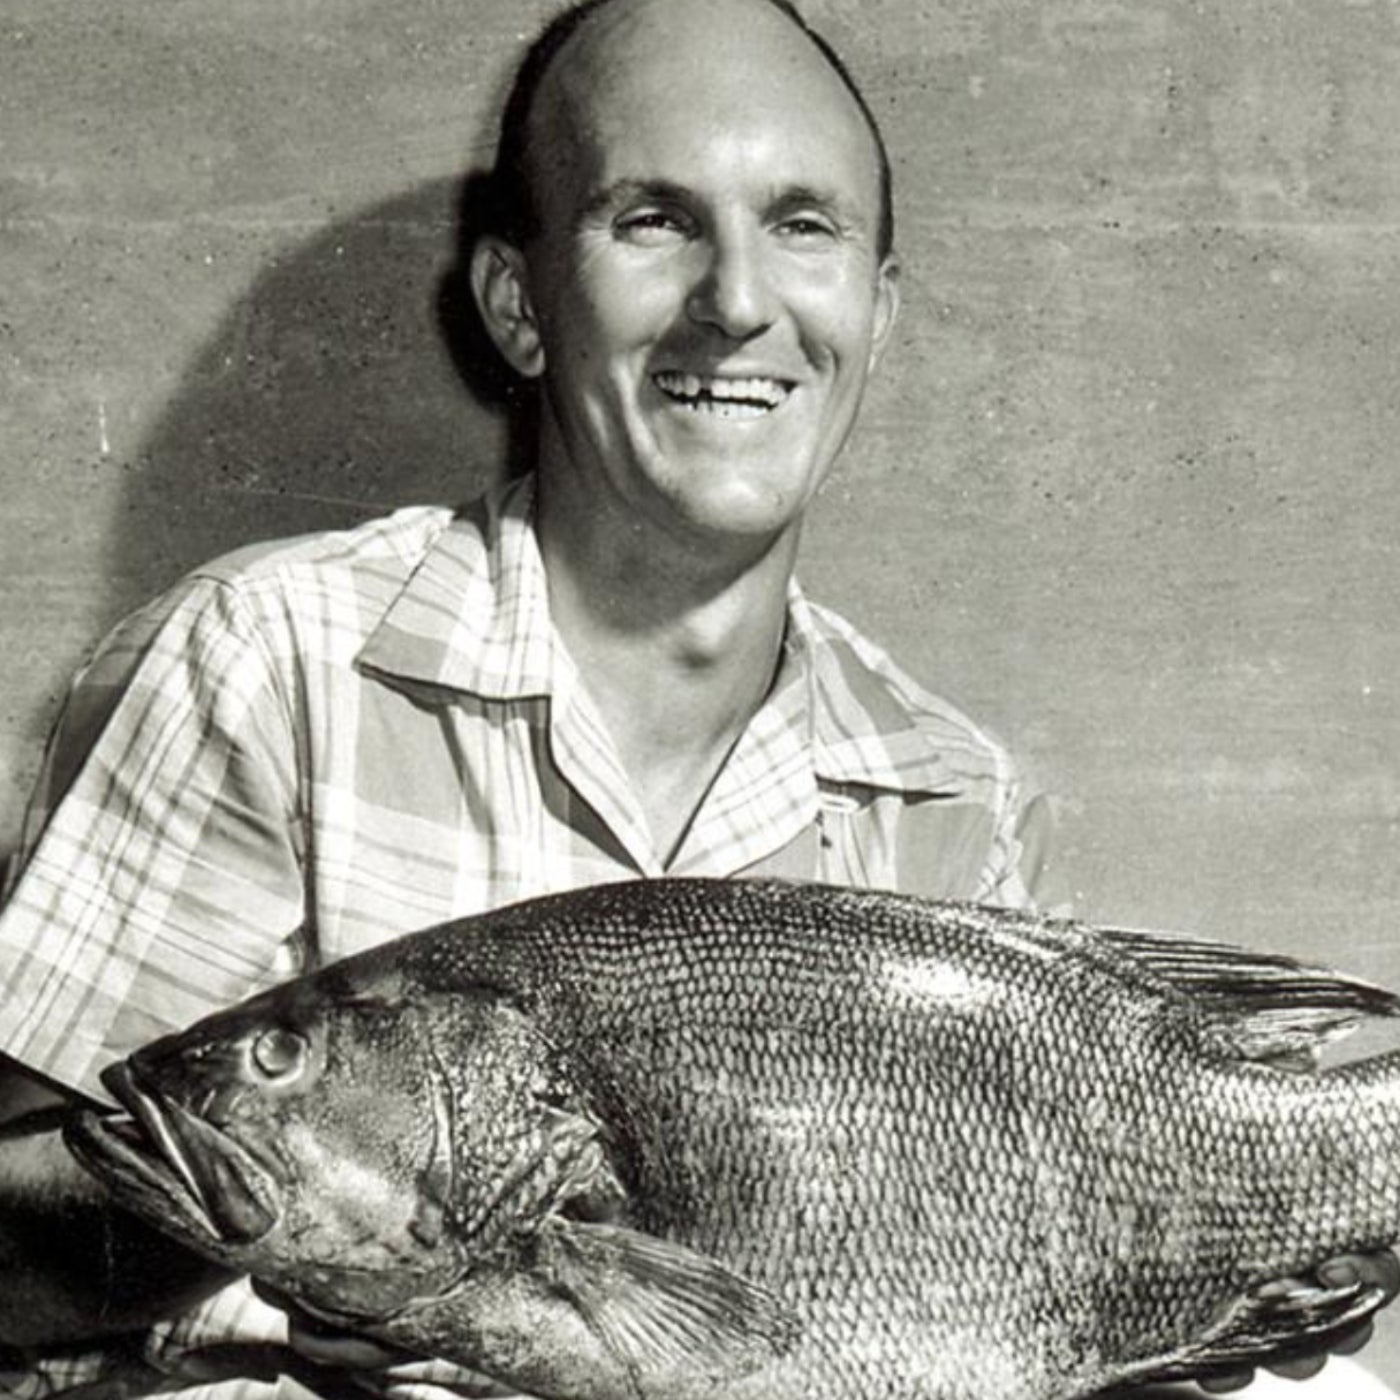 Big, Bad, Basted: Cooking Record-Sized Fish